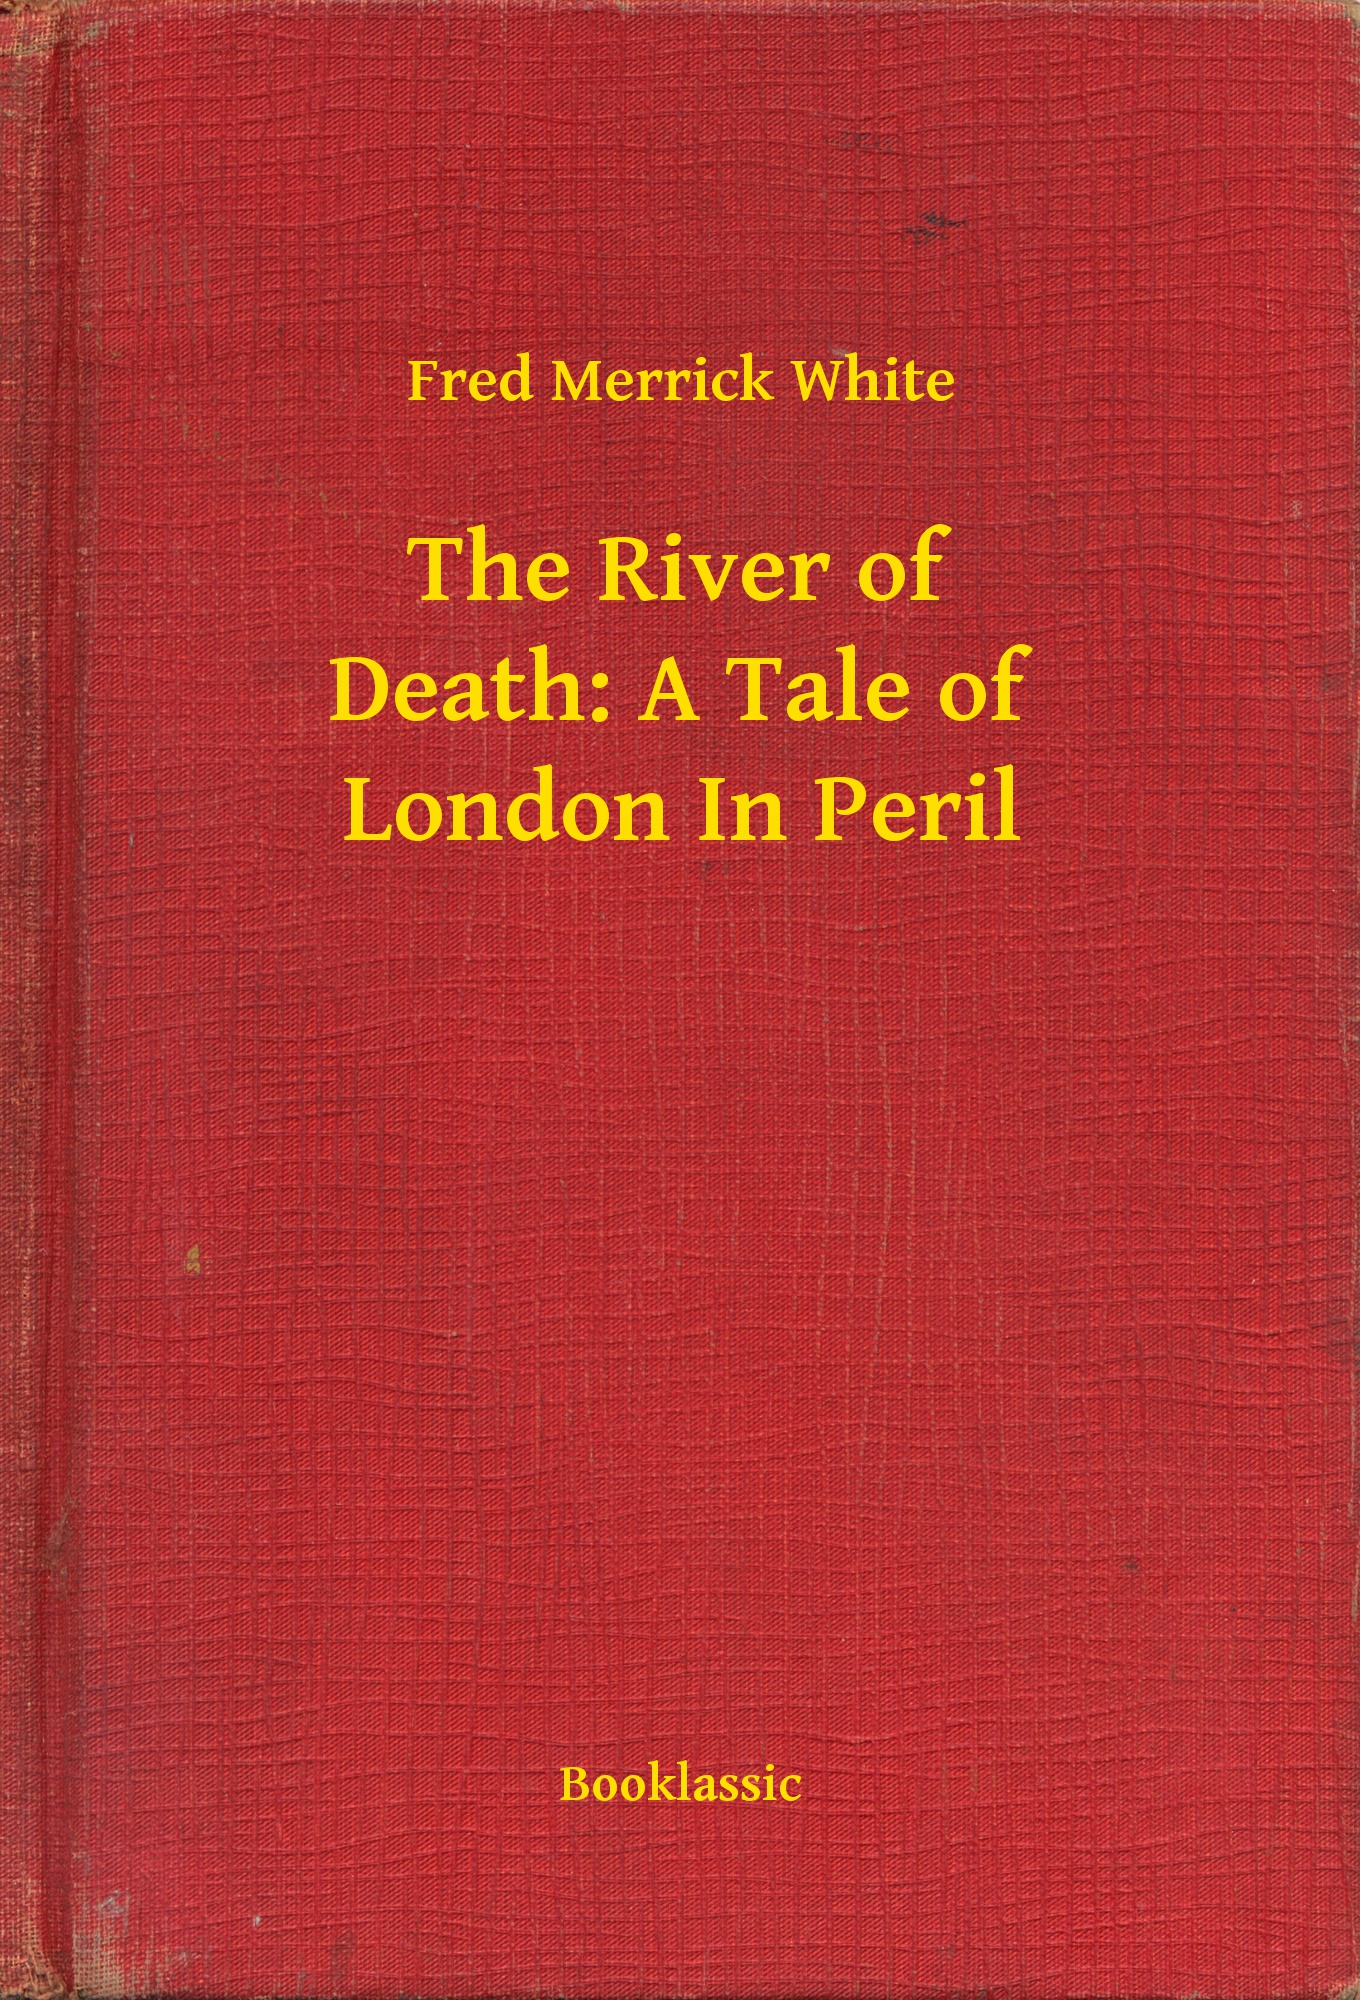 The River of Death: A Tale of London In Peril